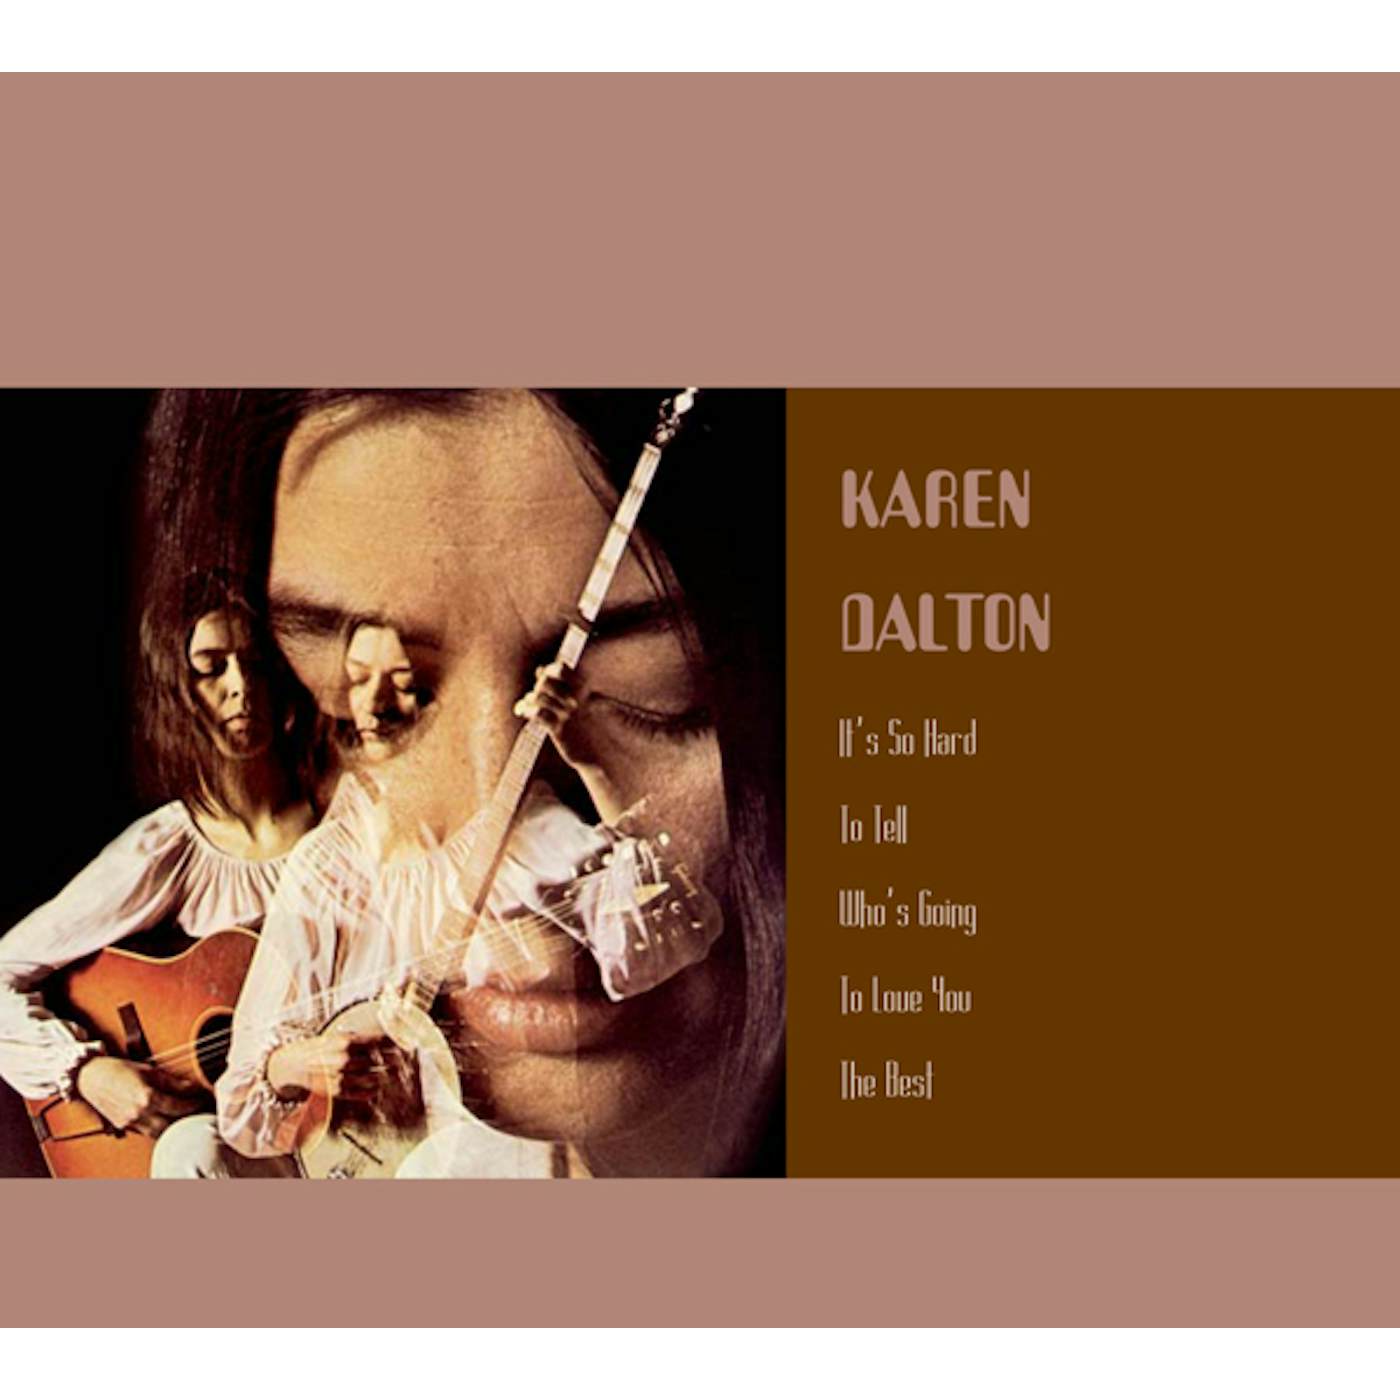 Karen Dalton IT'S SO HARD TO TELL WHO'S GOING TO LOVE YOU THE CD